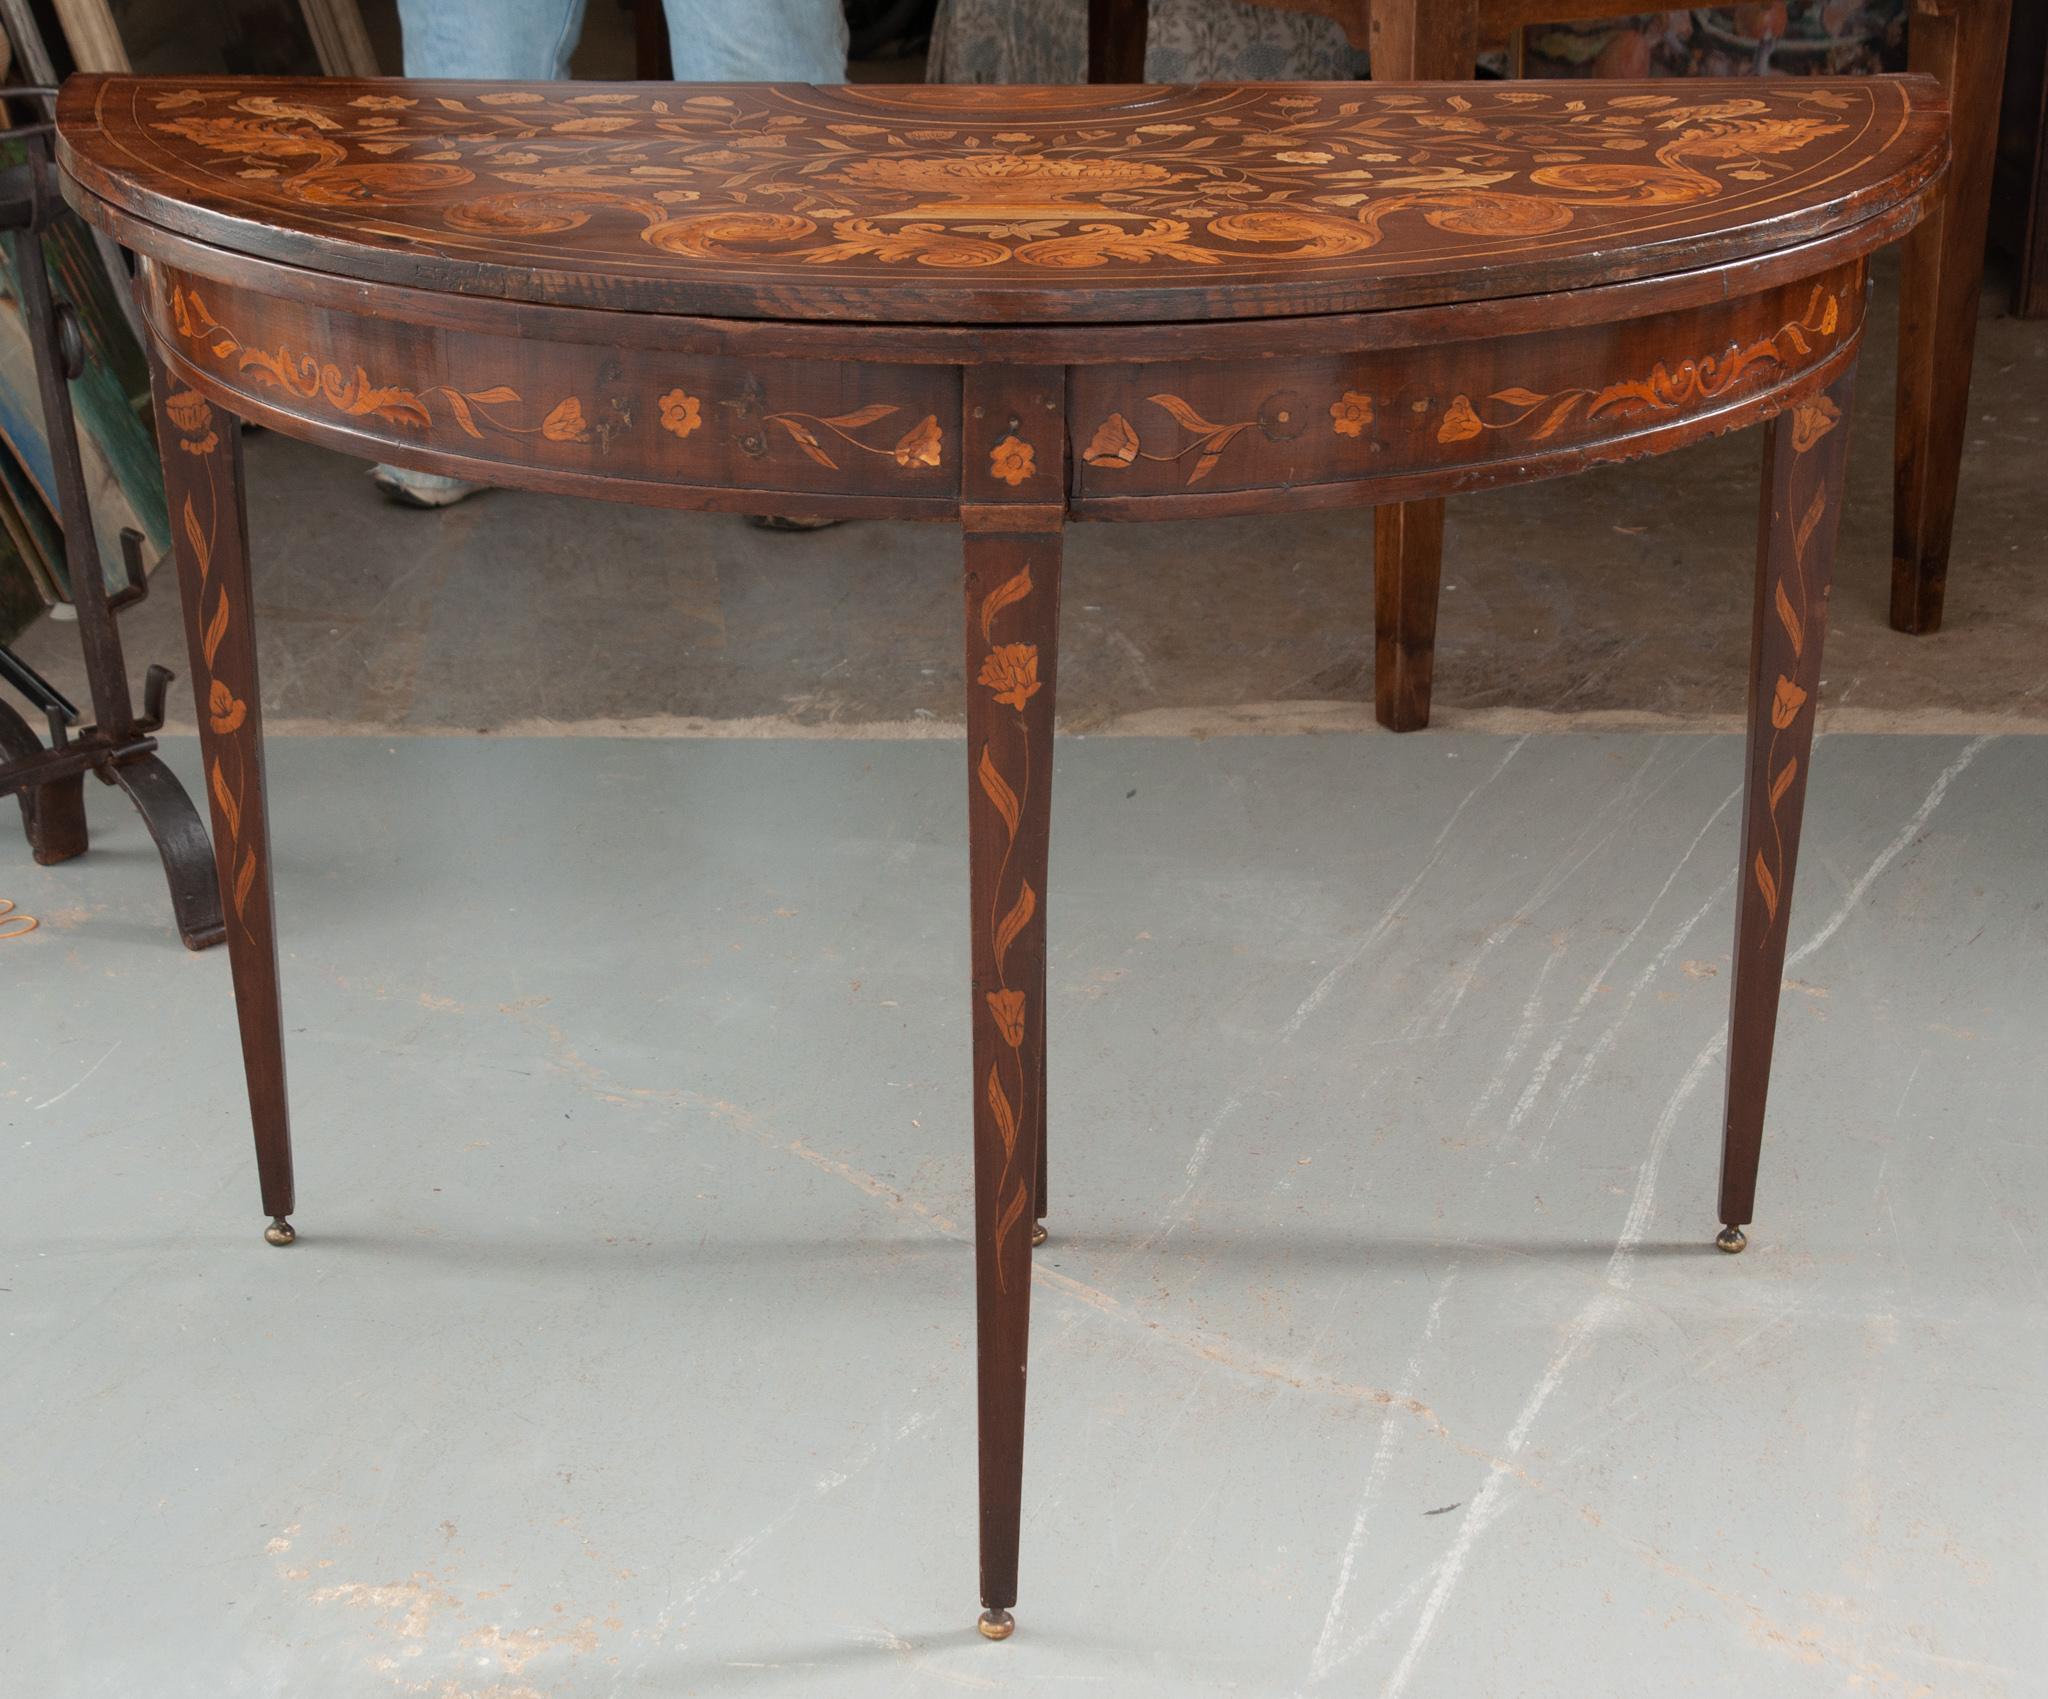 This Dutch game table/ console is made of mahogany with impressive satinwood marquetry, circa 1795. When in demi-lune form the beautiful marquetry motif of flowers, overflowing vase, swallows, and scrolling leaves is on full display. The detailed